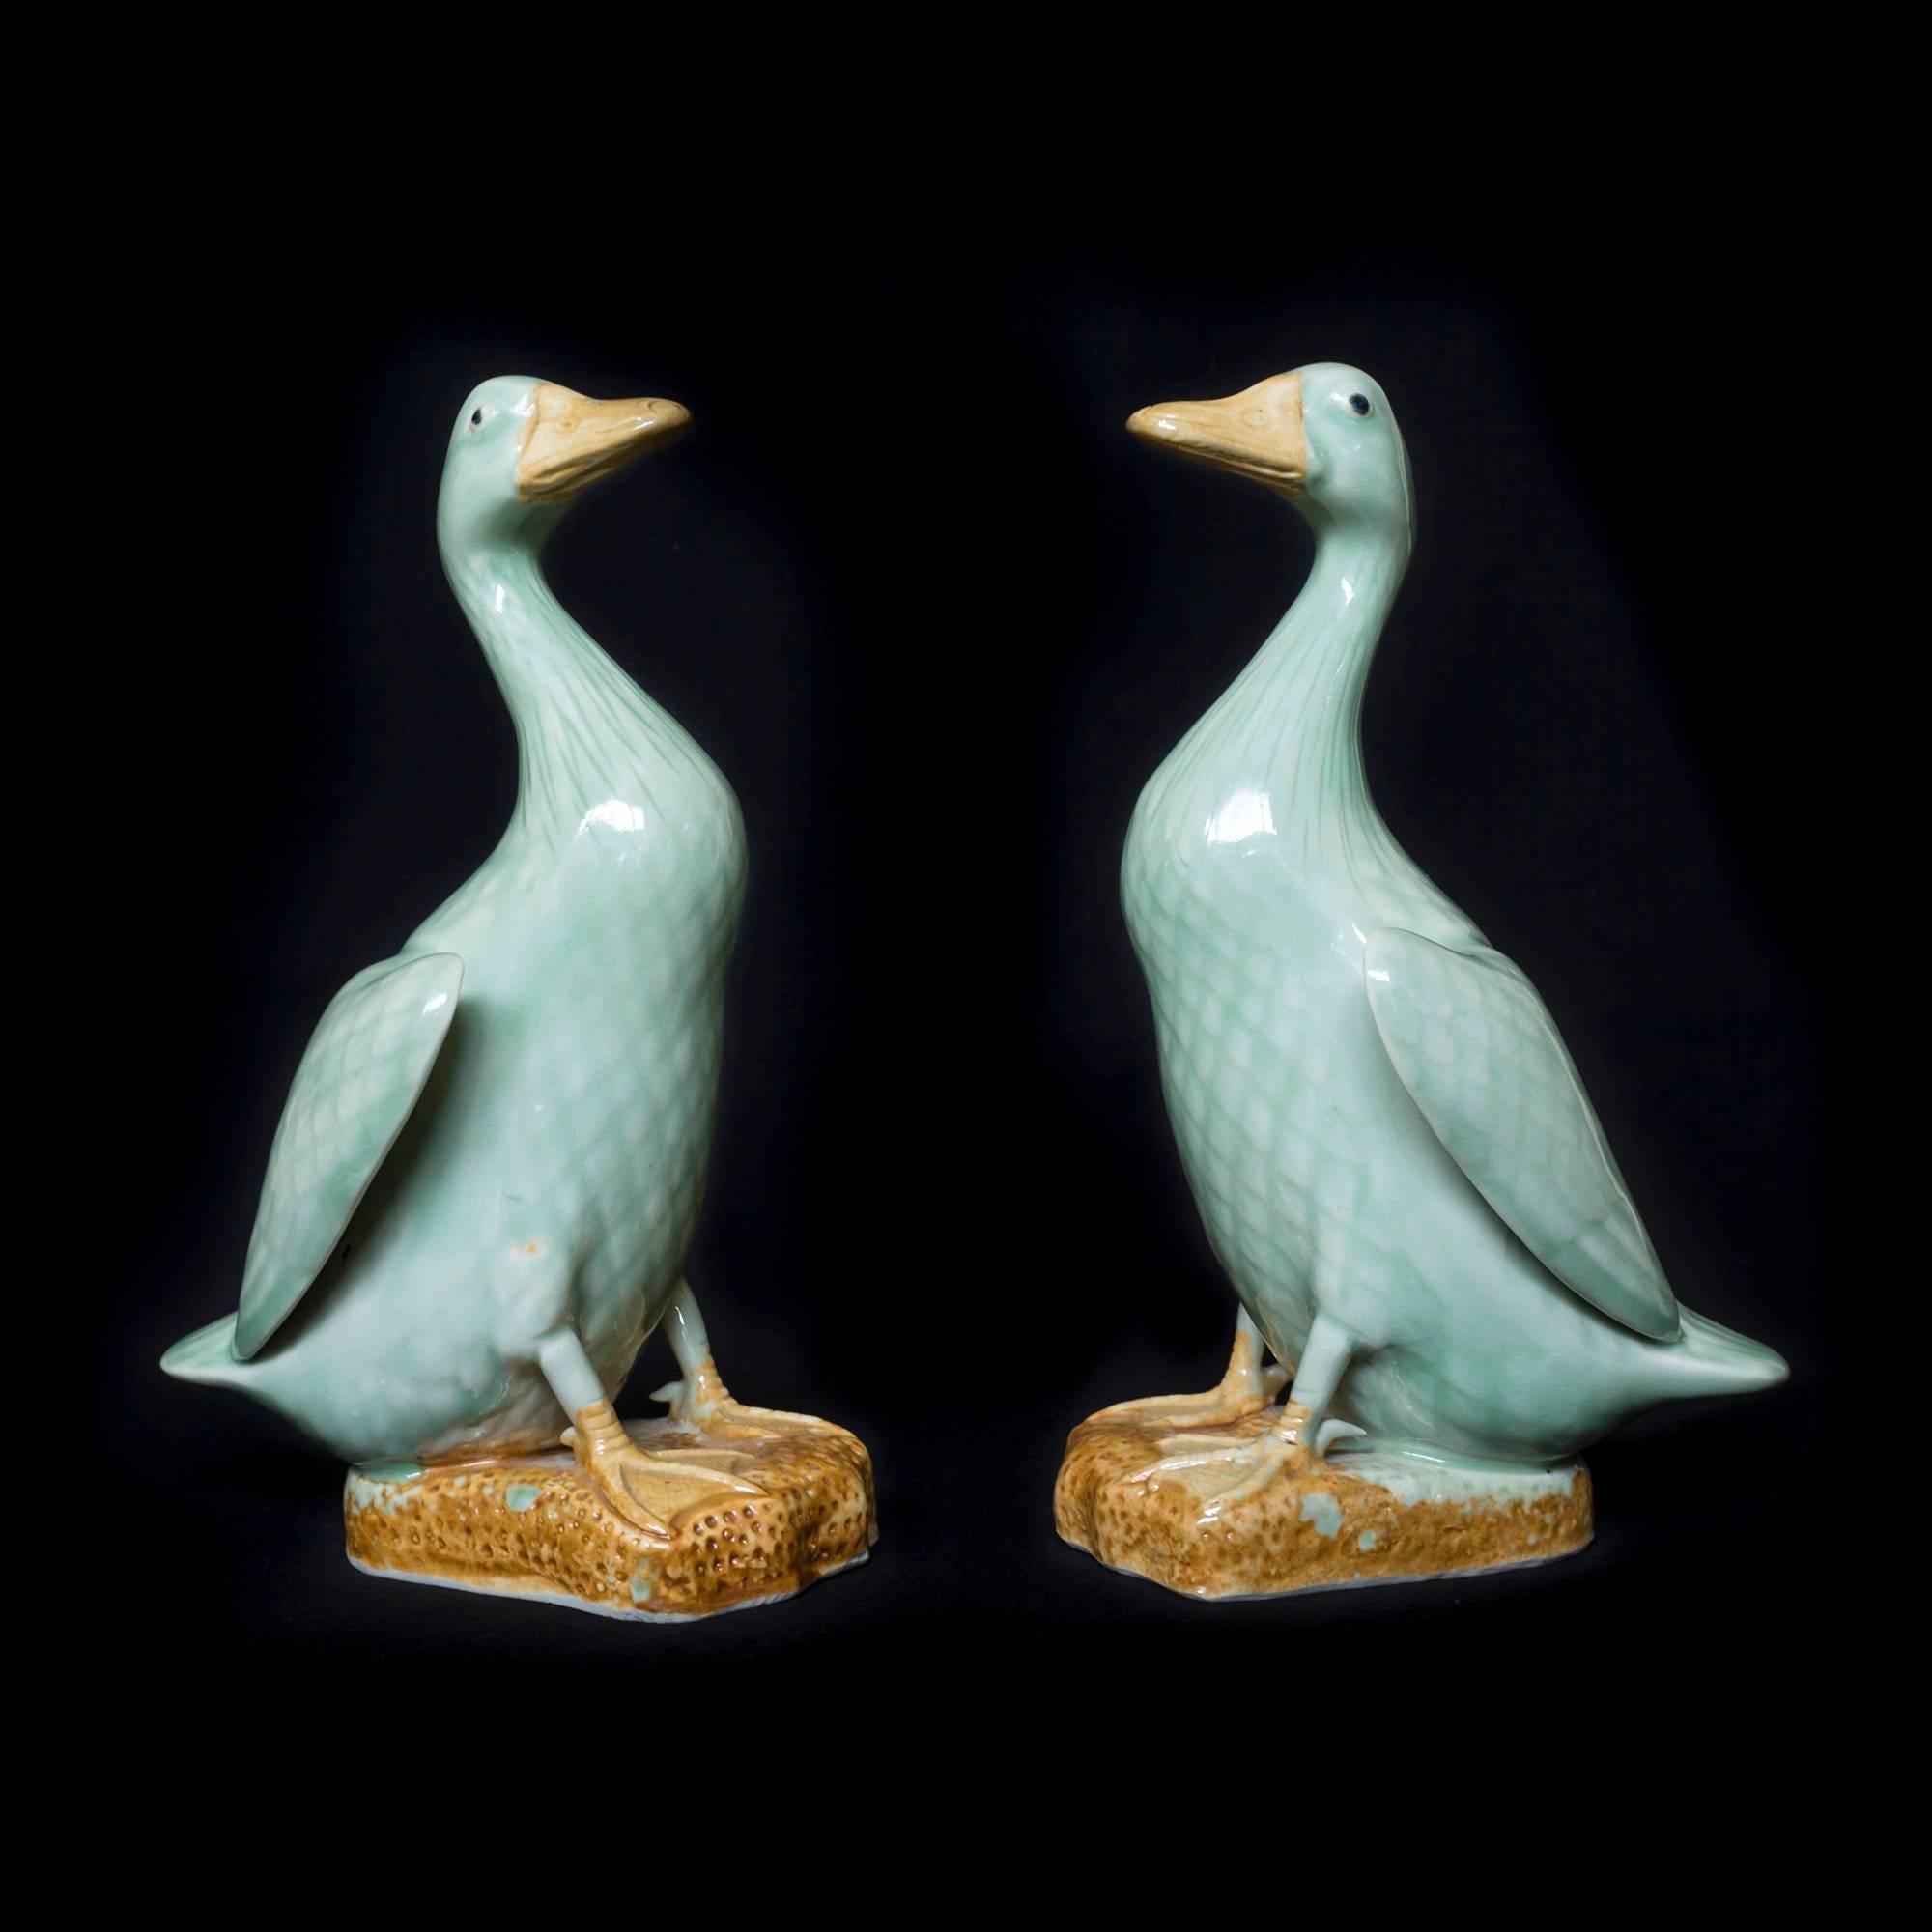 Chinese Export Pair of Chinese Celadon-Glazed Porcelain Ducks